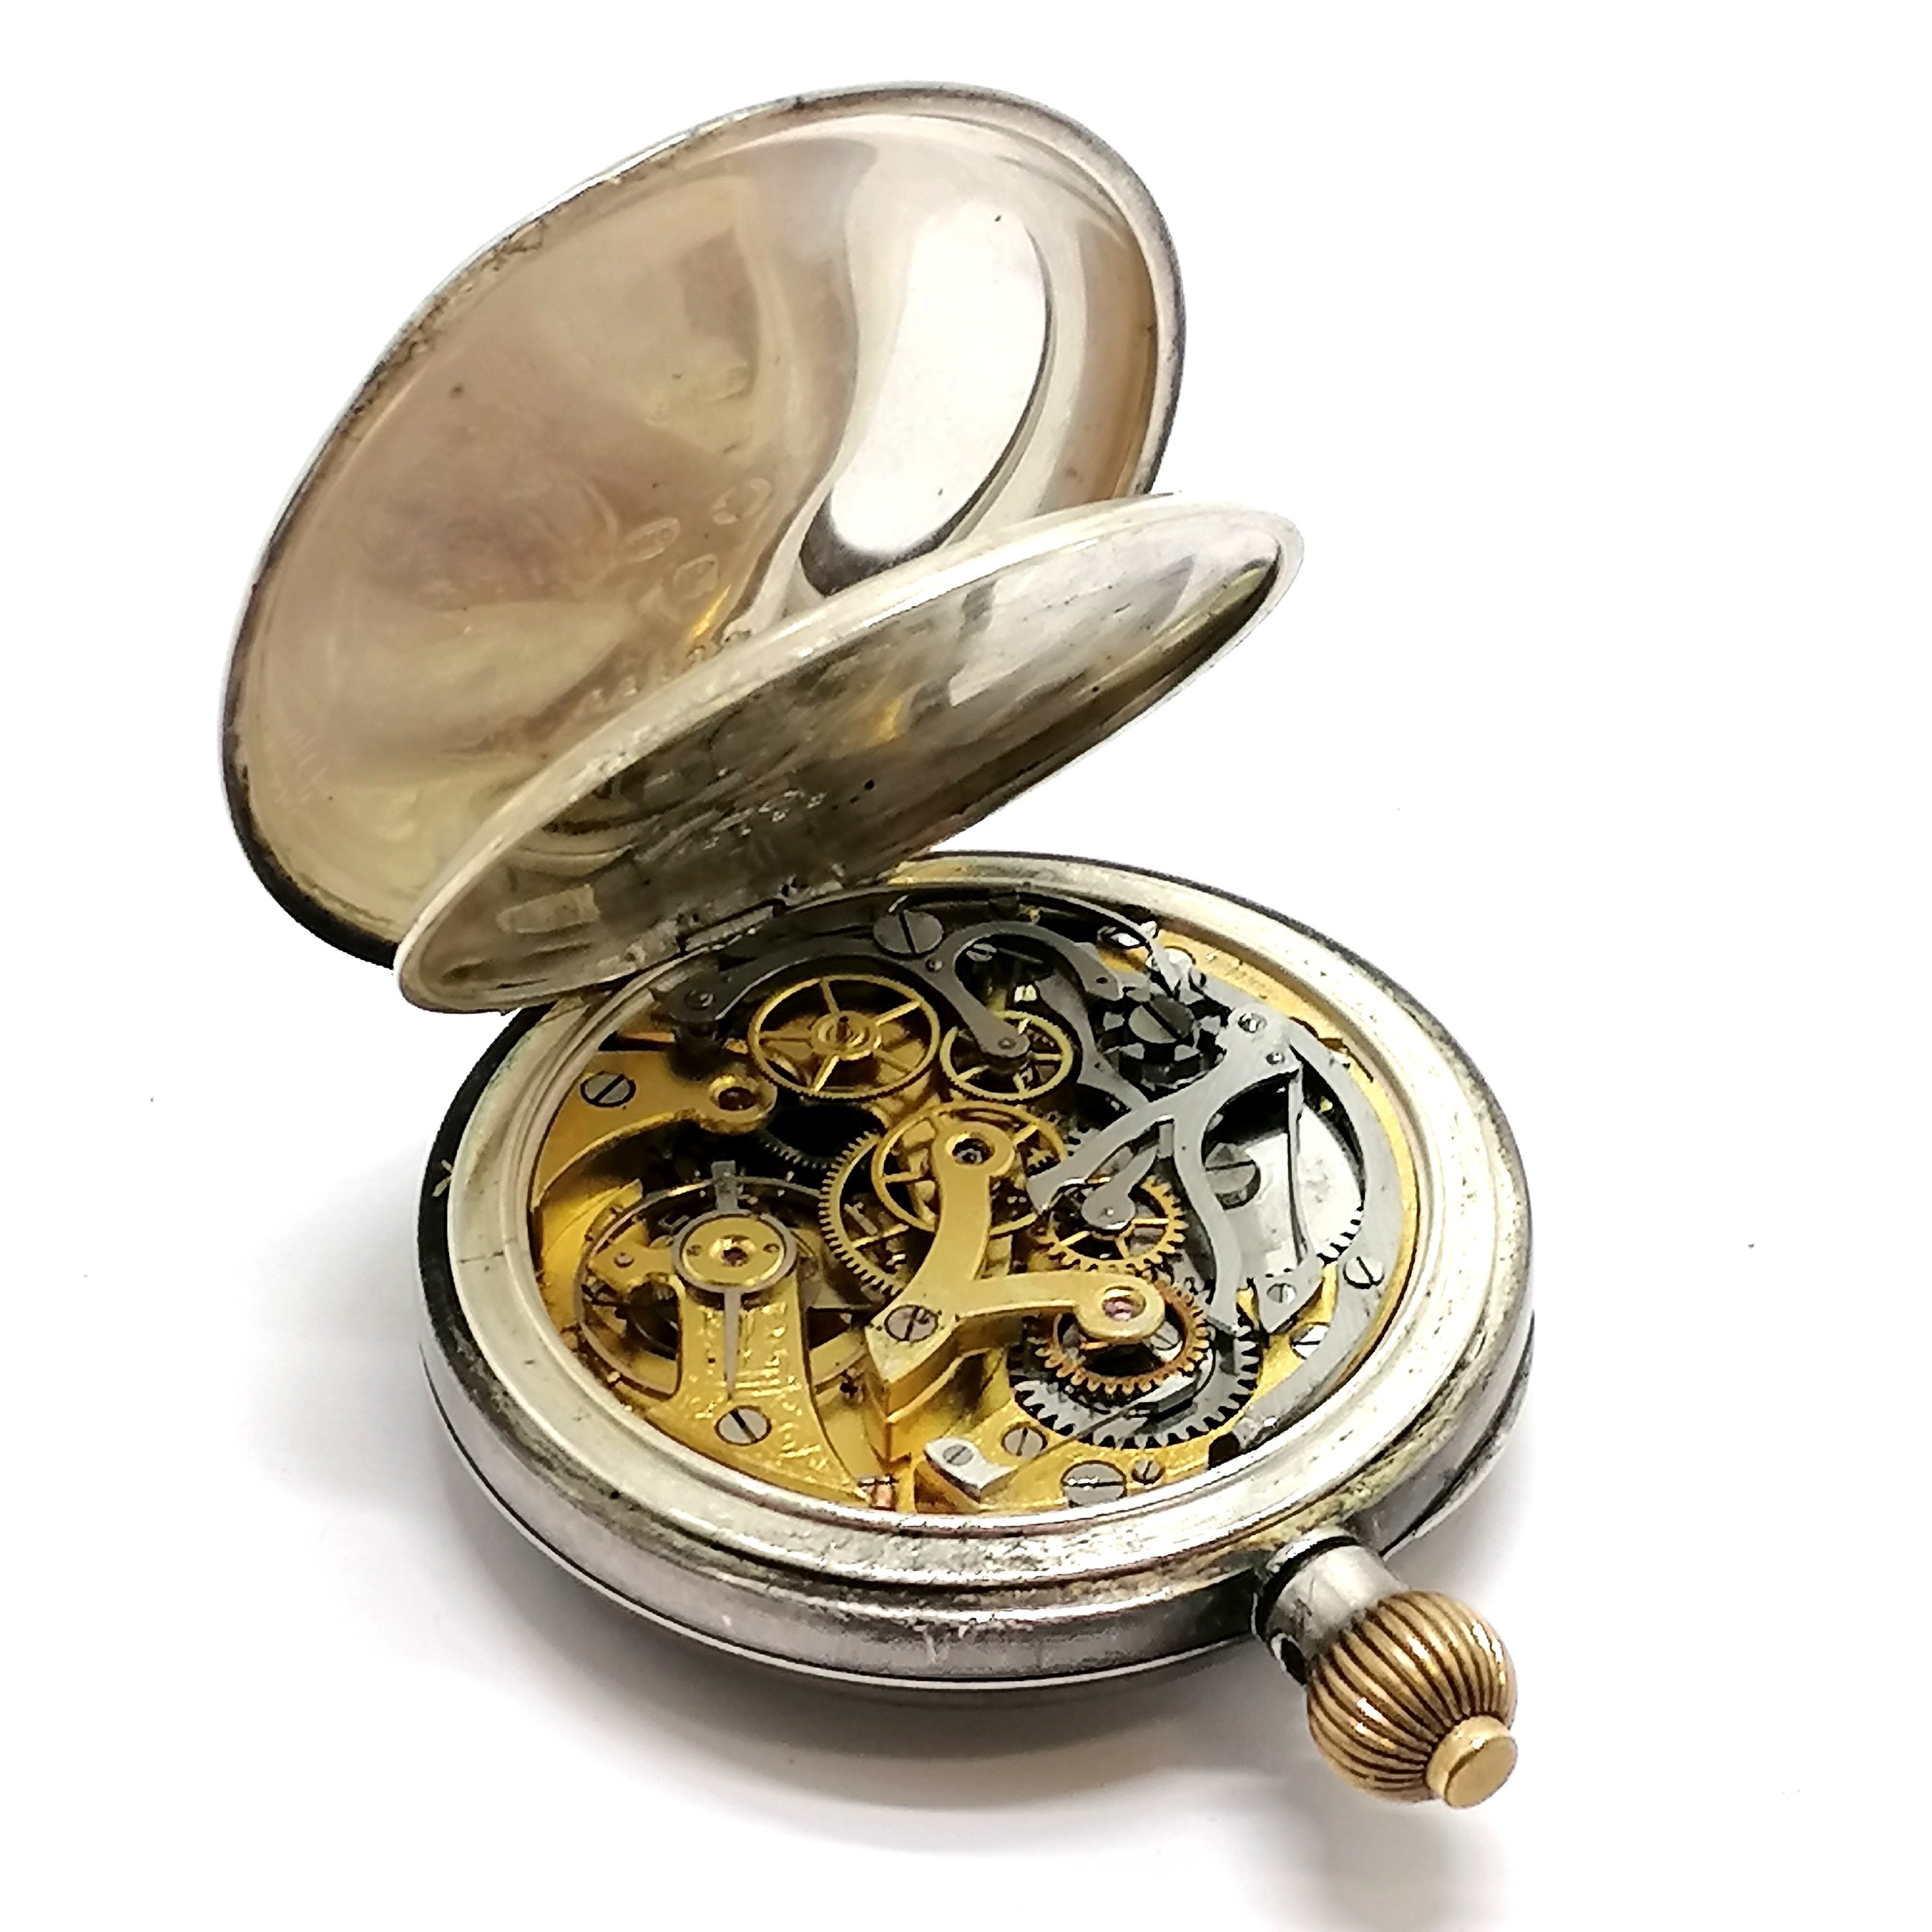 Antique silver cased chronograph pocket watch - 45mm diameter & lacks 1 hand to sub-dial, winder - Image 2 of 2